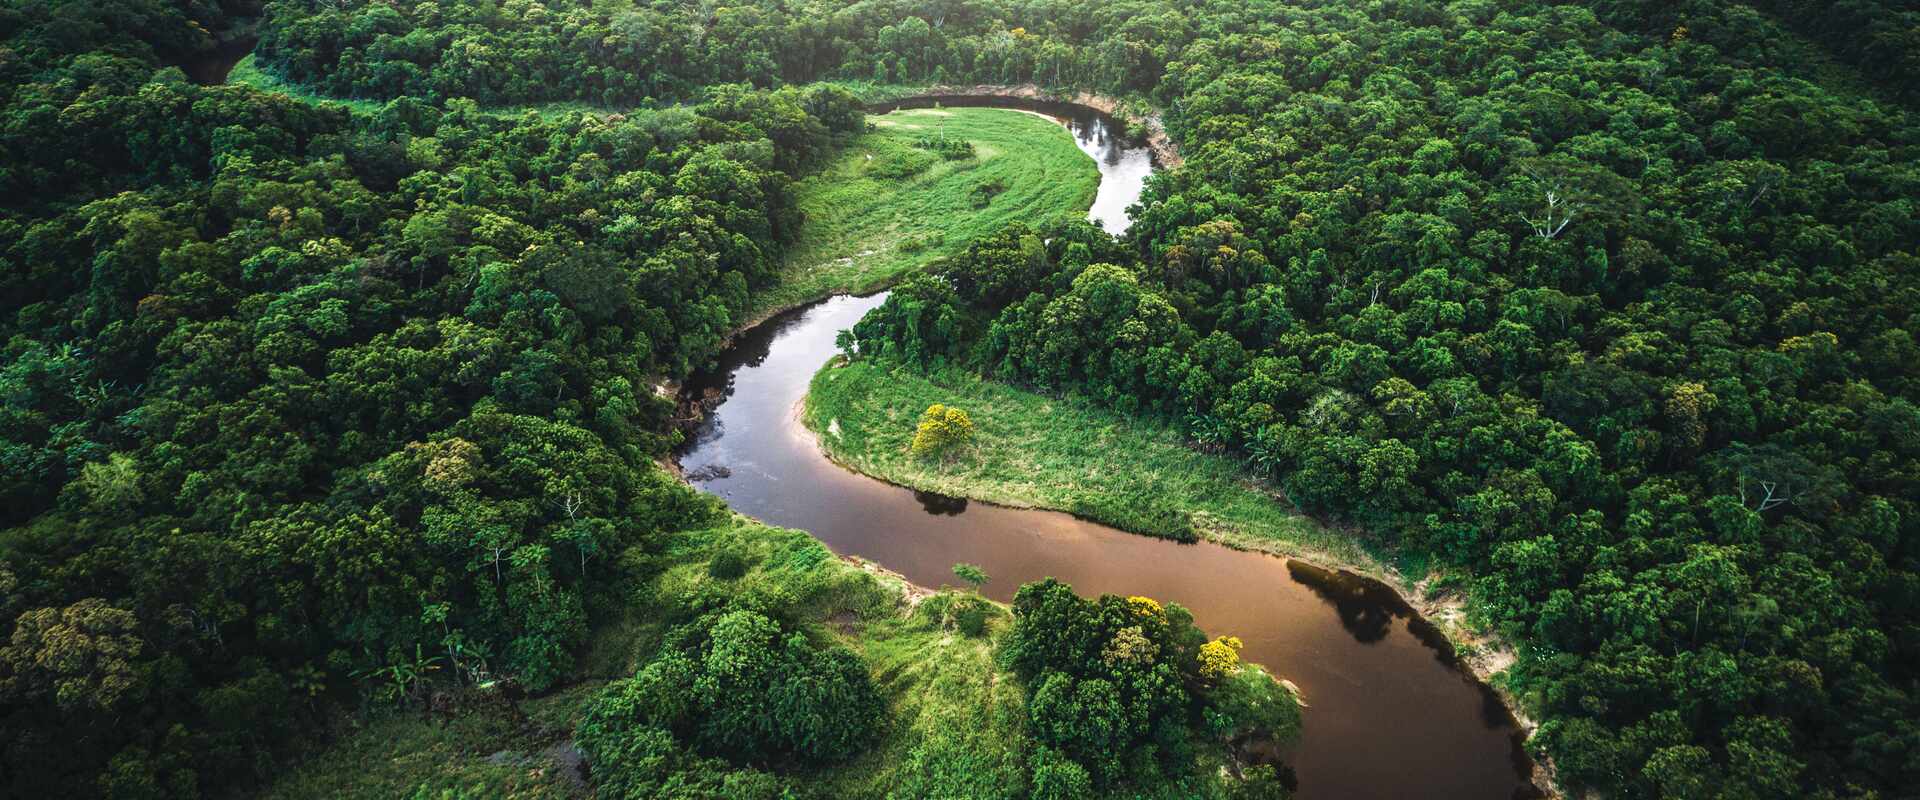 Aerial view over Amazon River winding through thick green rainforest in Brazil.